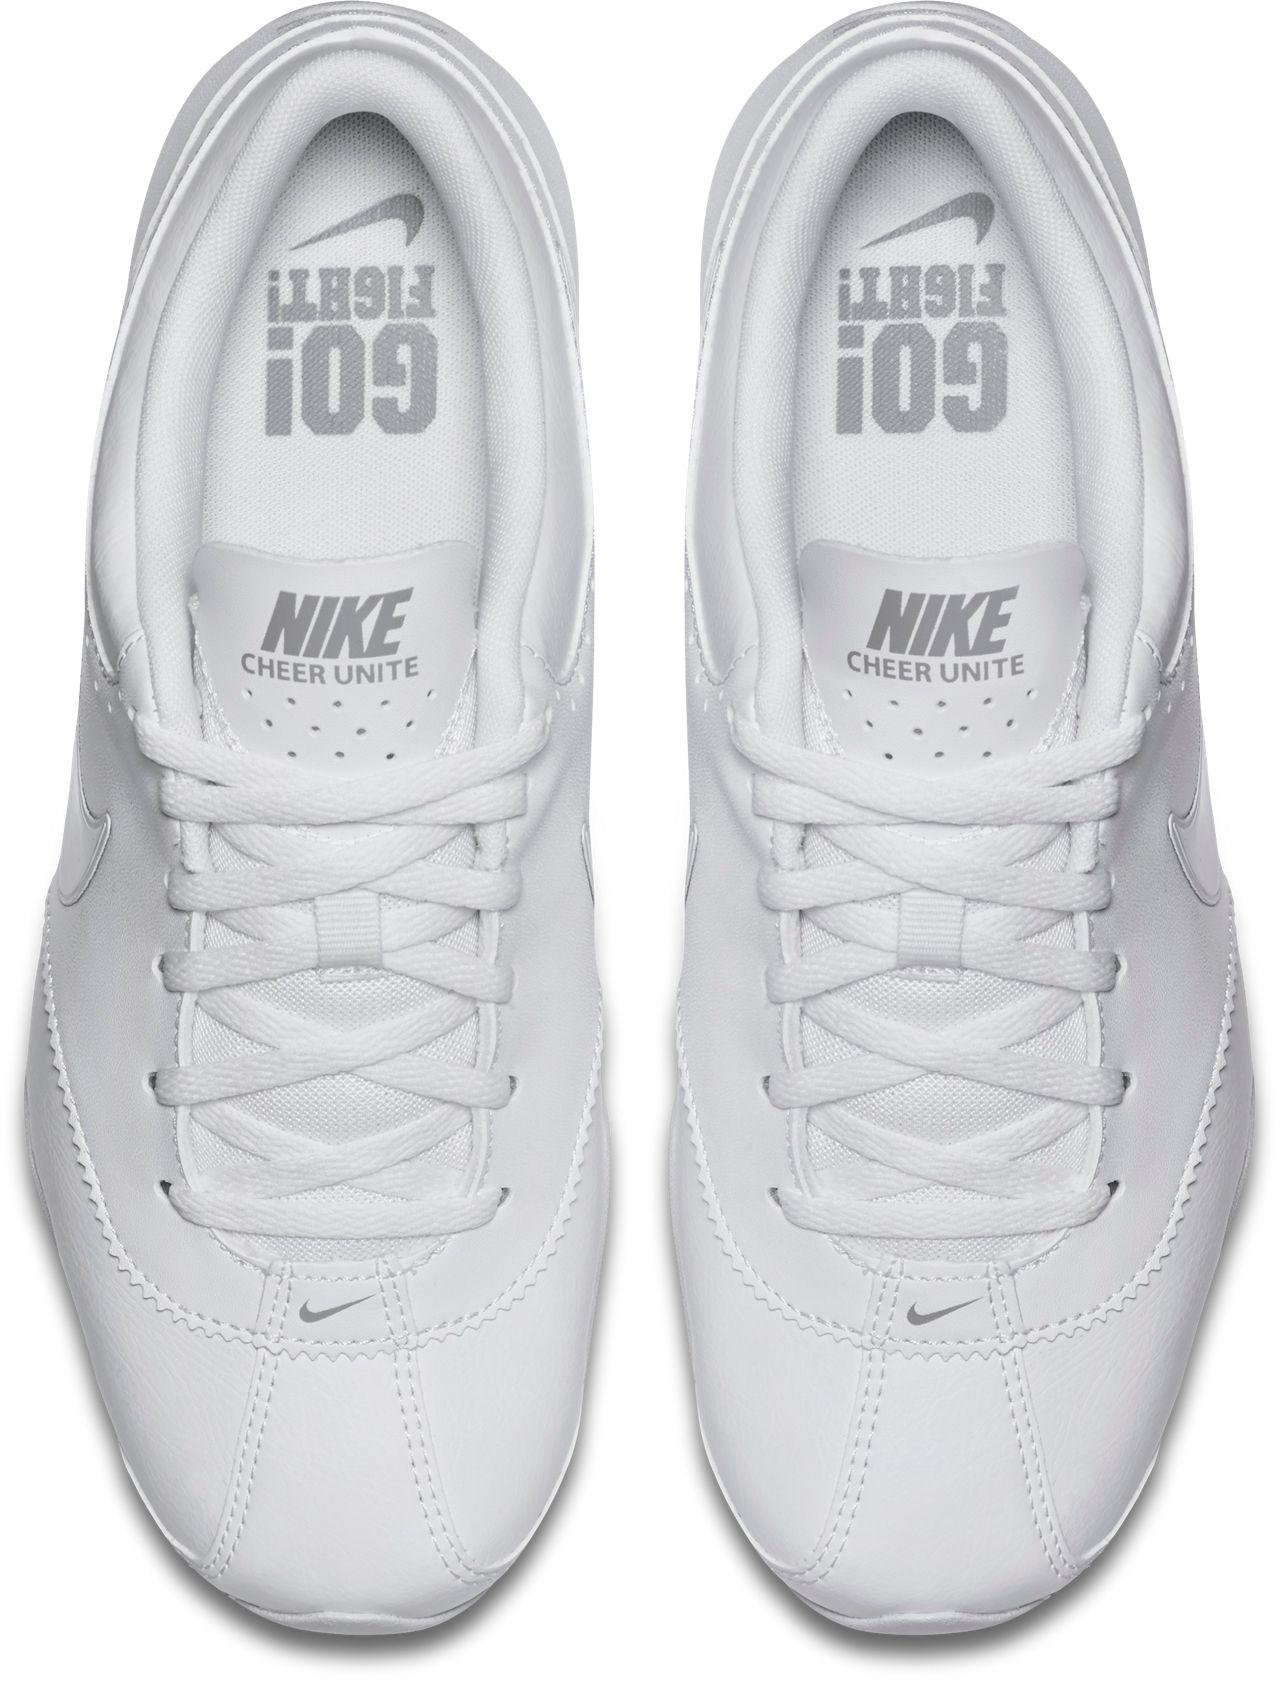 Nike Synthetic Cheer Unite Cheerleading Shoes in White - Lyst